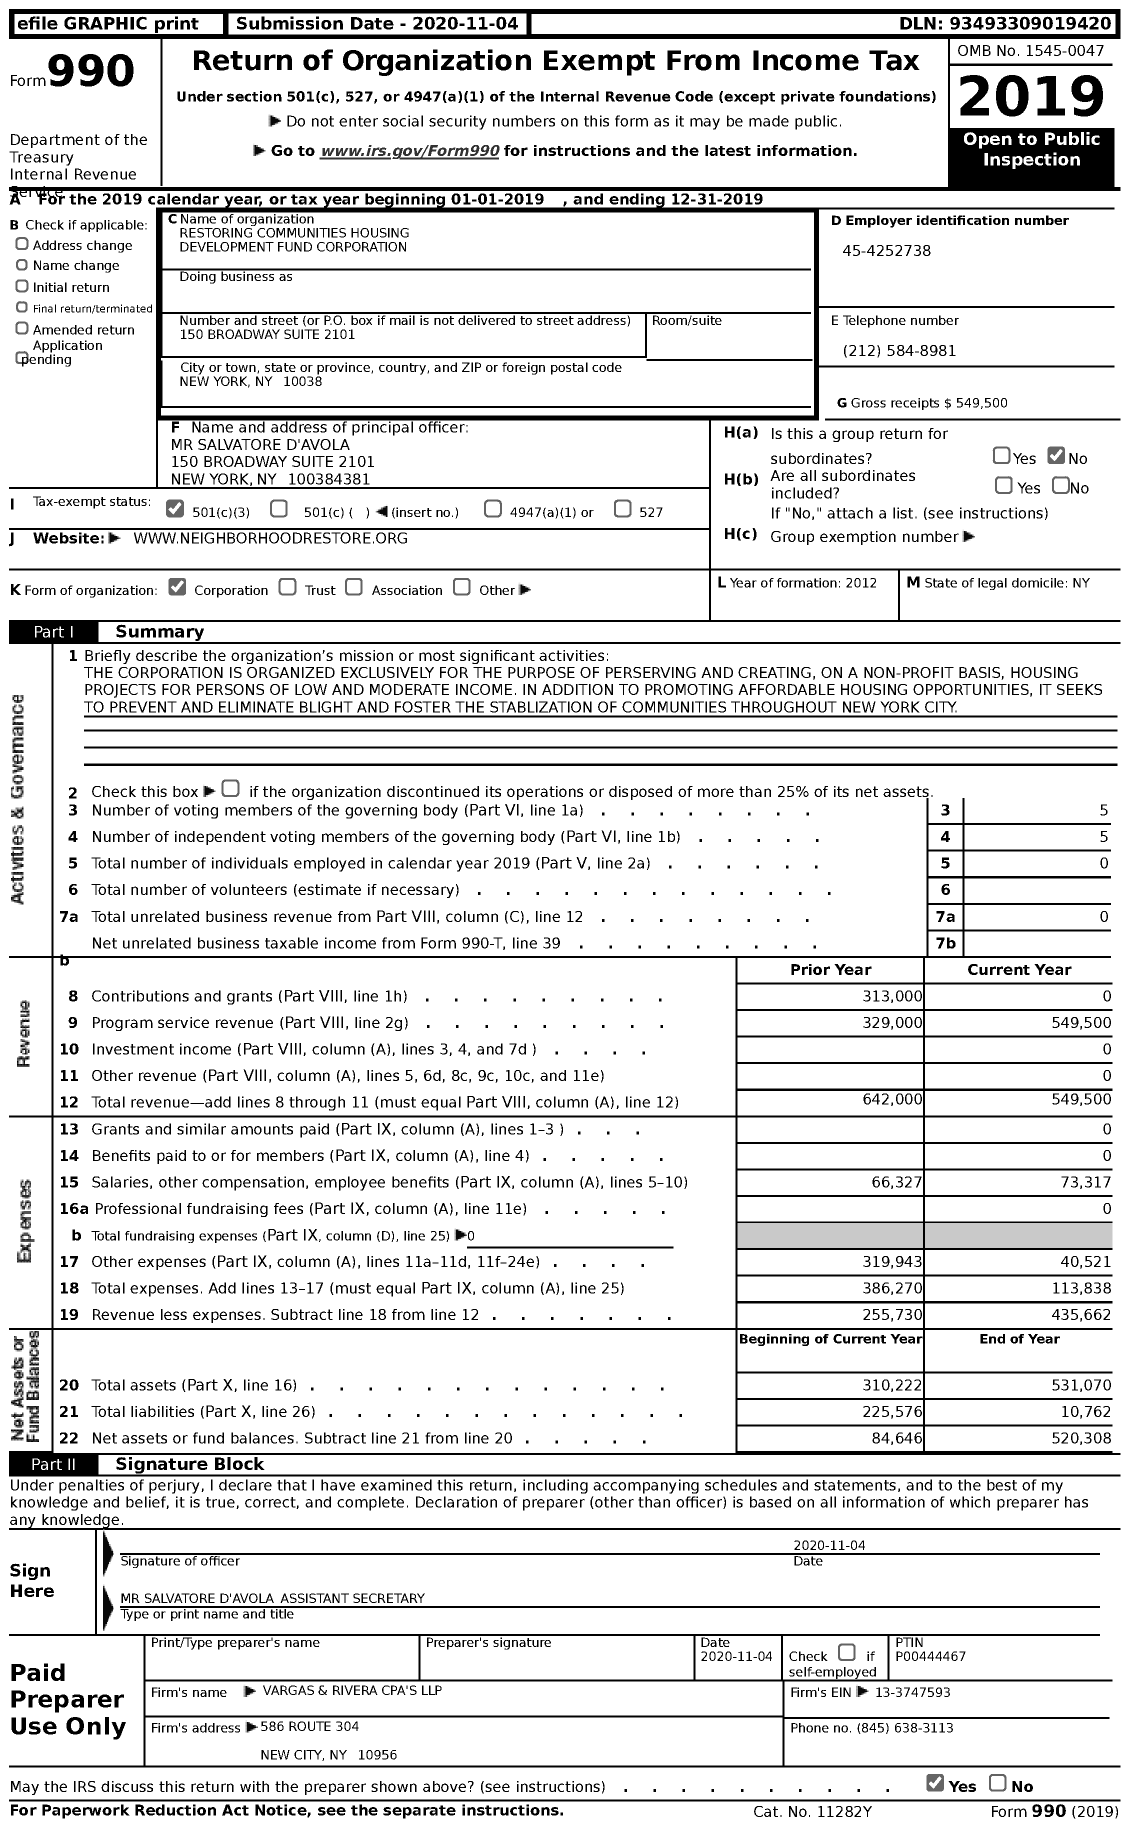 Image of first page of 2019 Form 990 for Restoring Communities Housing Development Fund Corporation